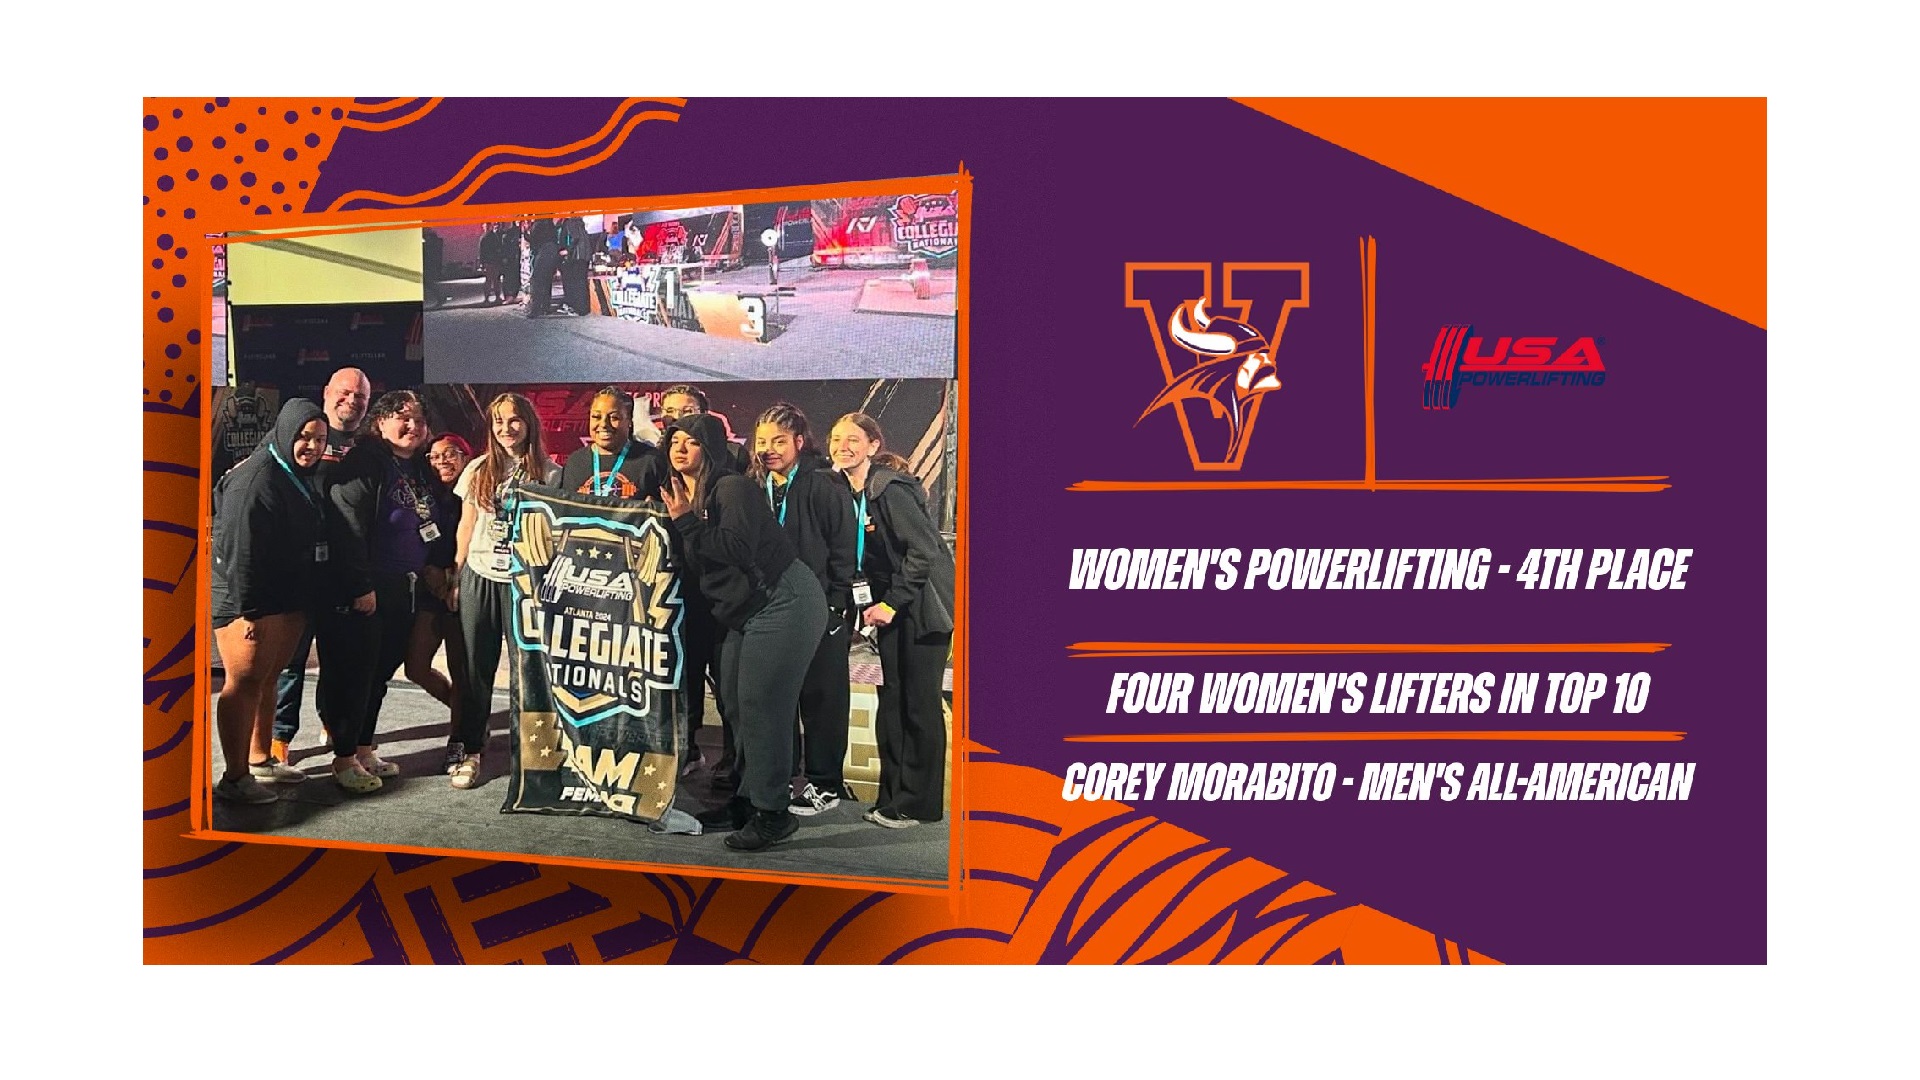 Women's Powerlifters Place Fourth, Men's Team Produces All-American